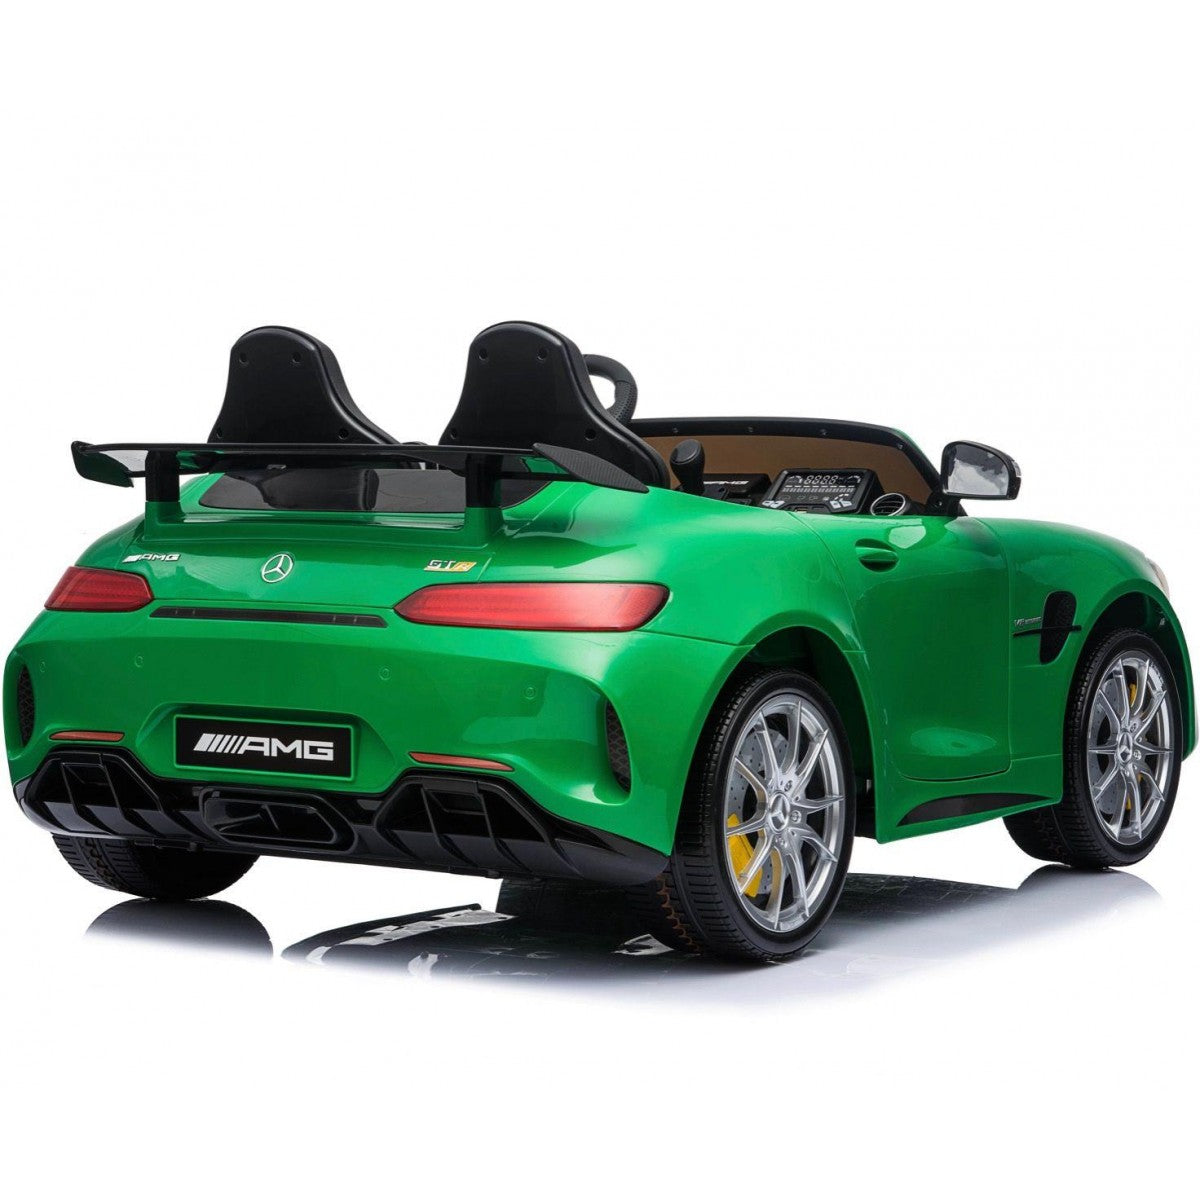 "Green Mercedes AMG GTR 2-Seater with Parent remote 24v from Kids Car Store displayed on white background."